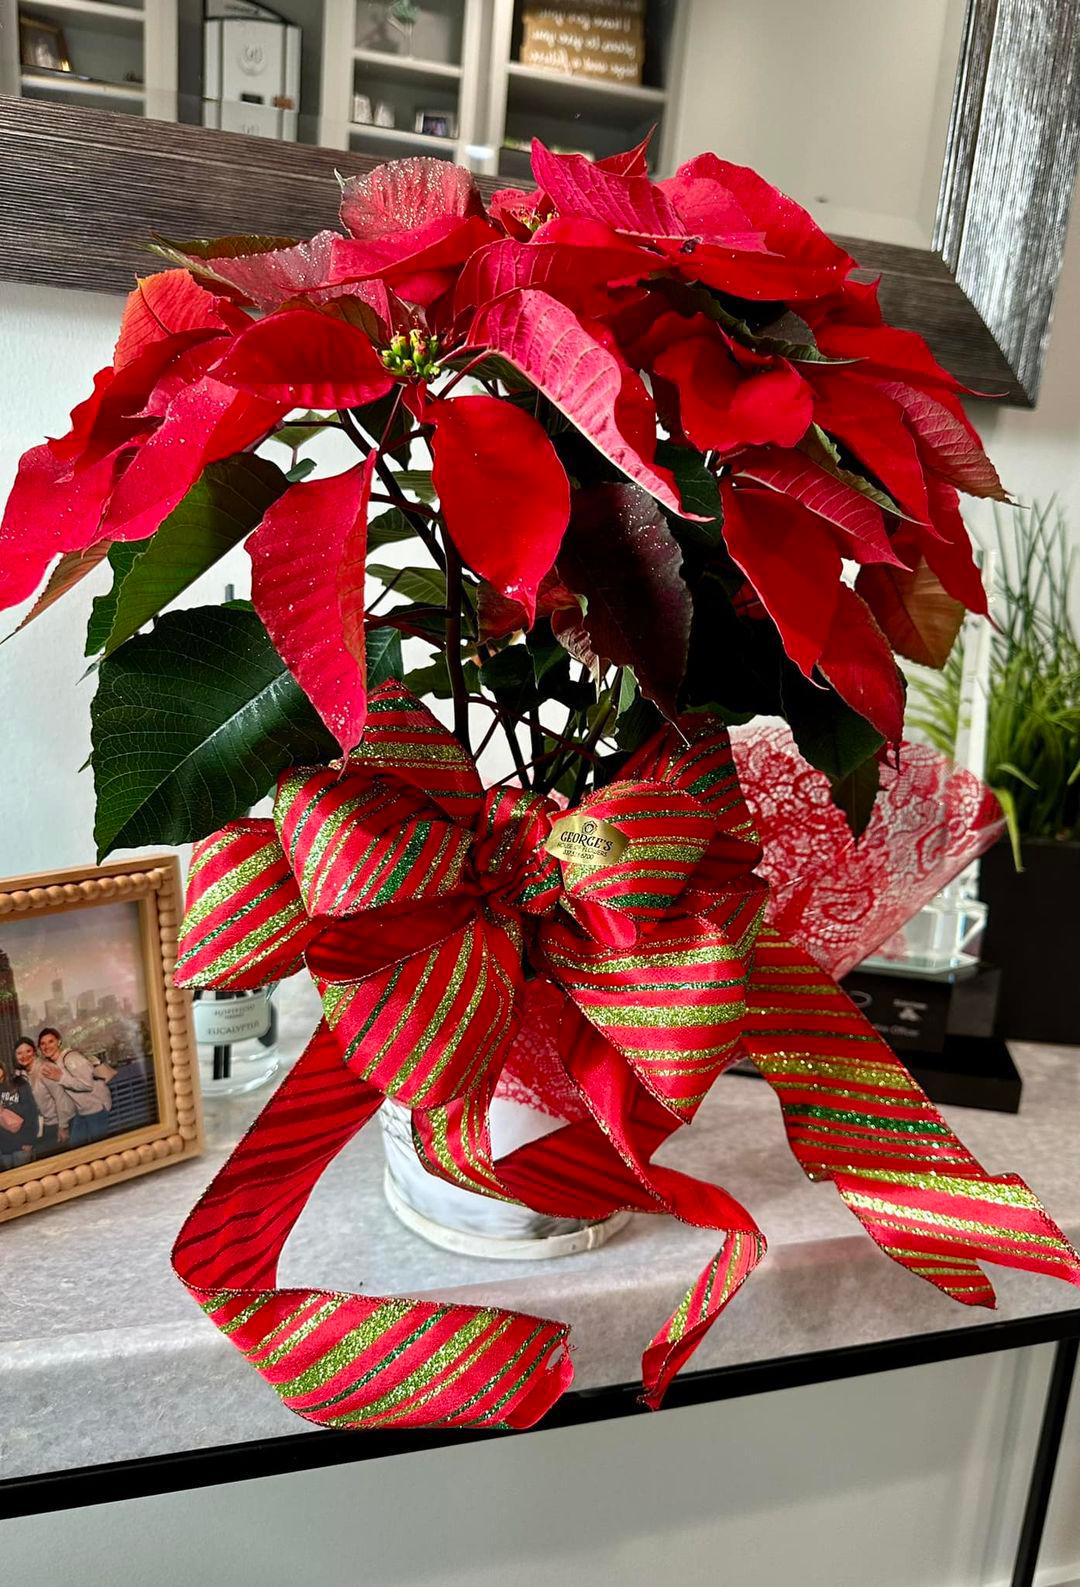 Thank you Grimball Pediatric Dentistry for the beautiful Christmas poinsettia! We have the best neig Jennifer Mabou - State Farm Insurance Agent Sulphur (337)527-0027